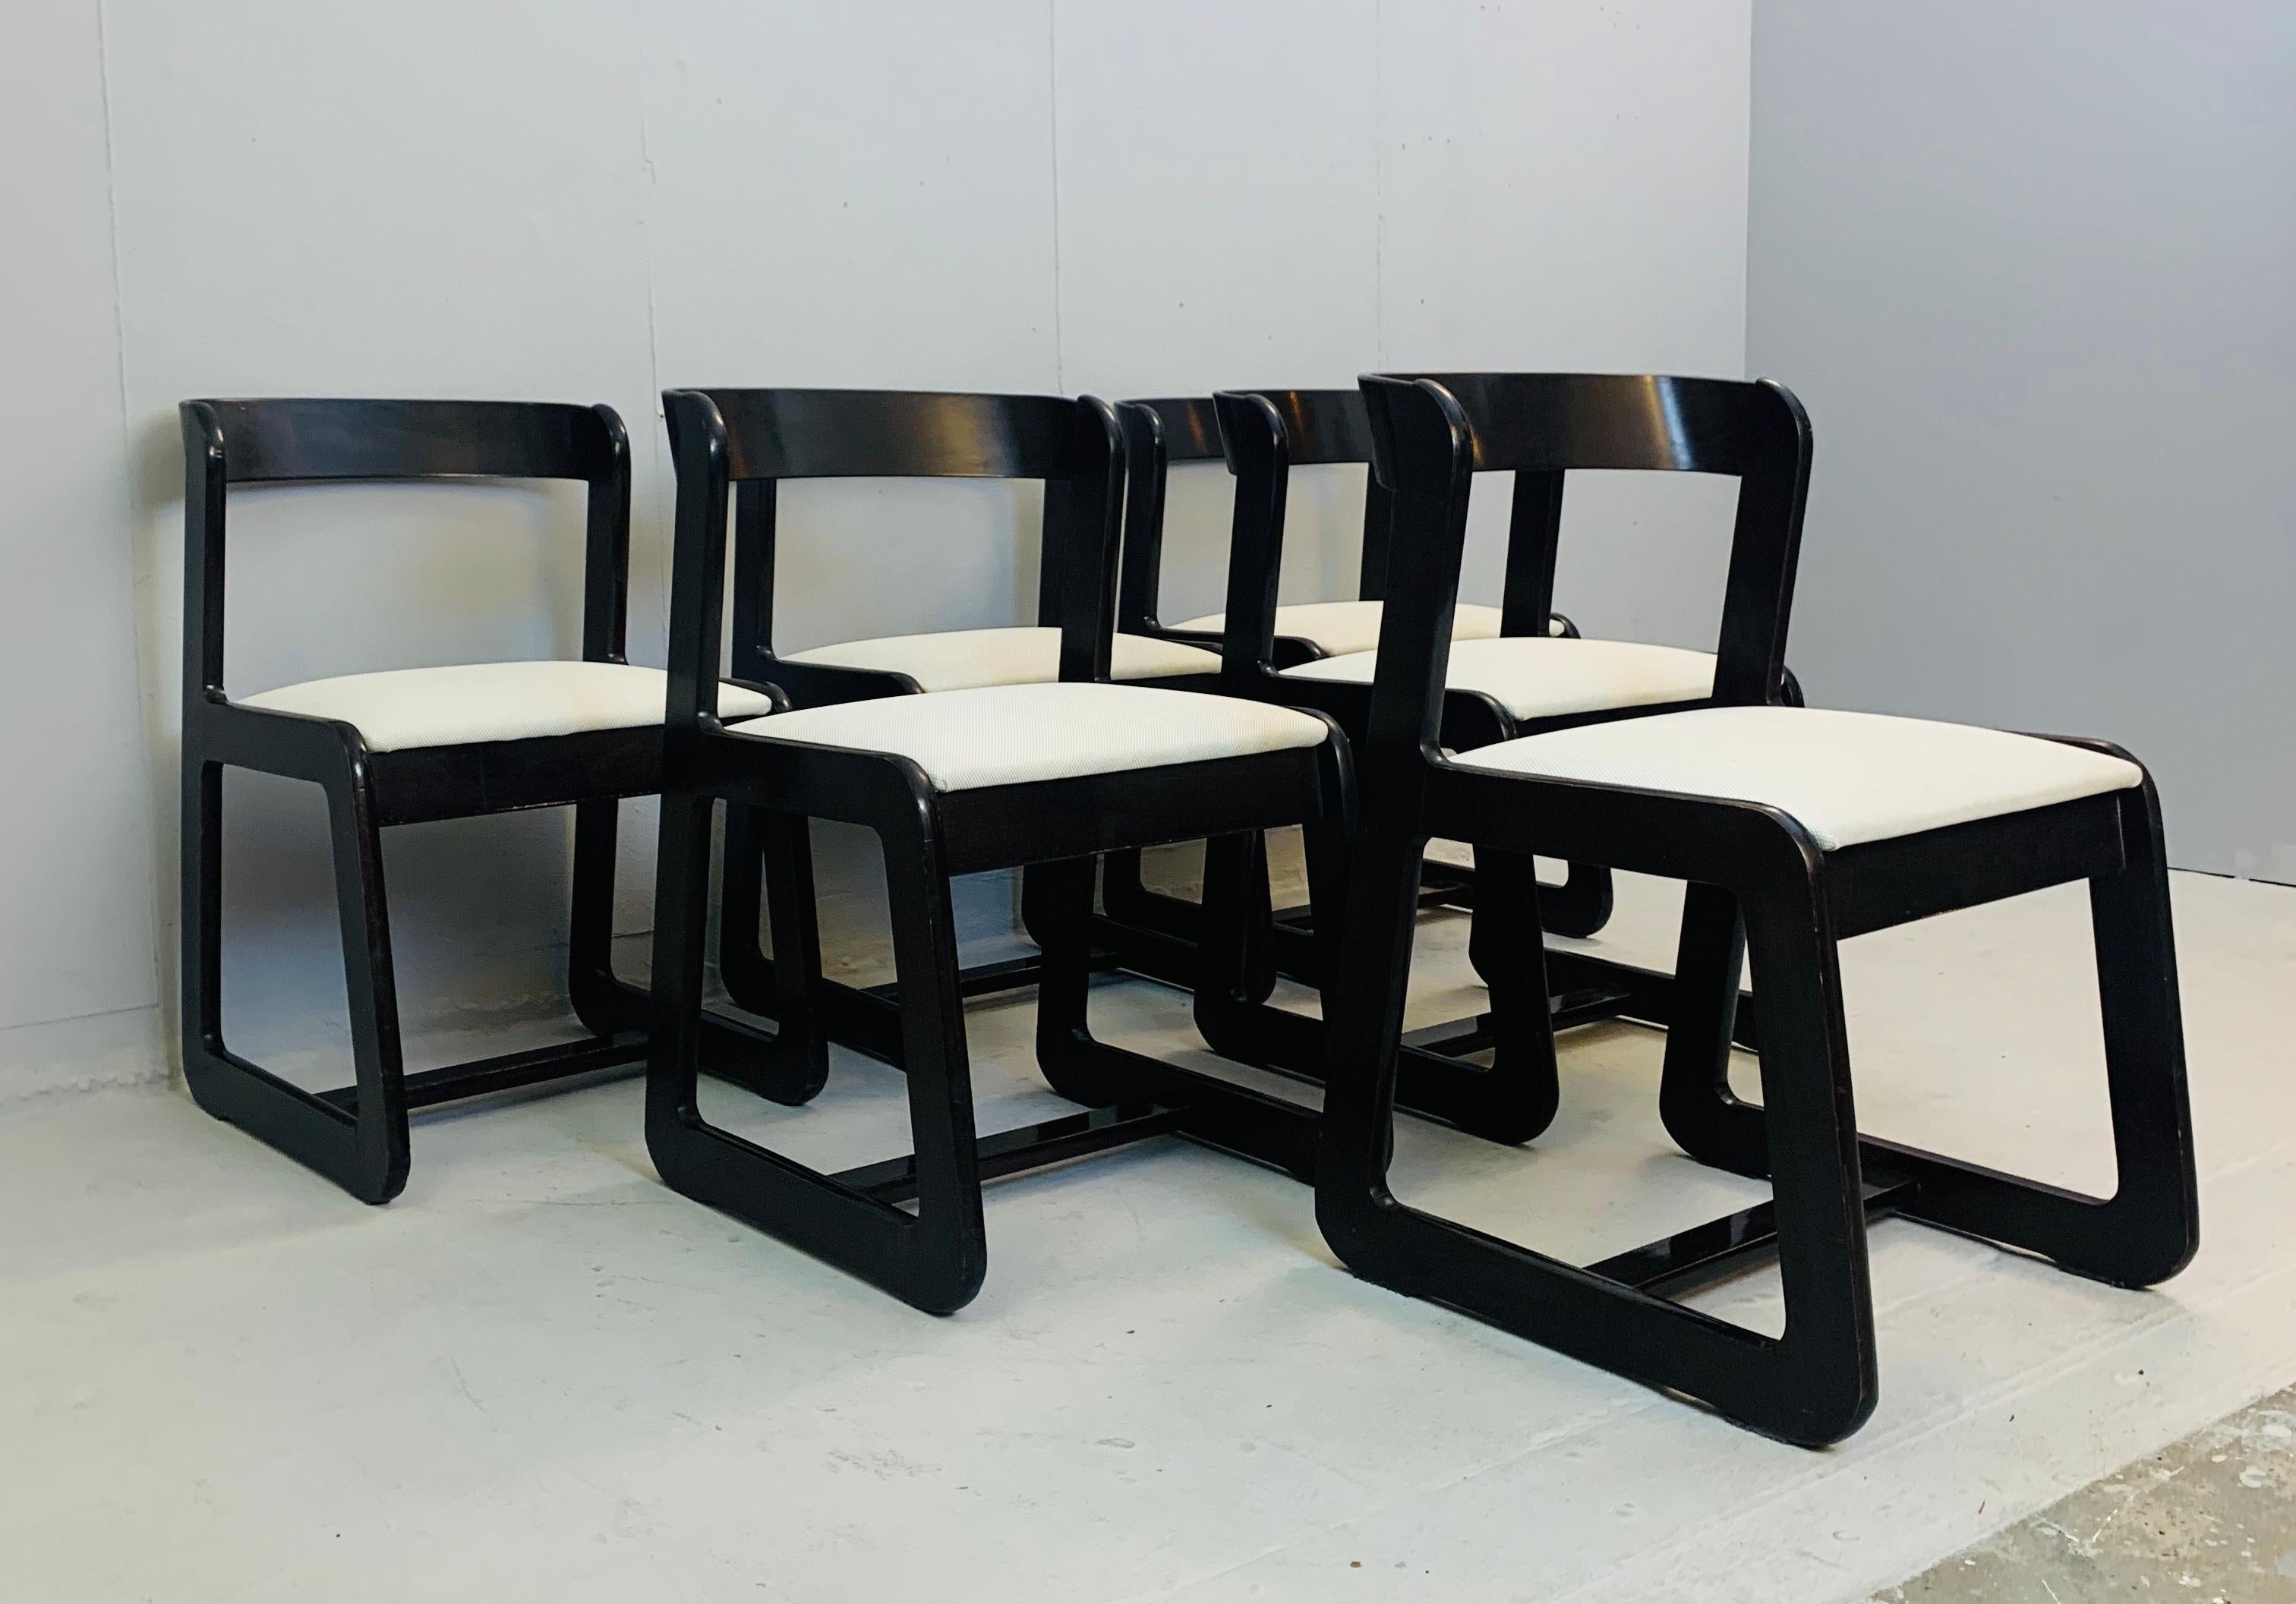 Italian Set of 6 Chairs Attributed to Willy Rizzo